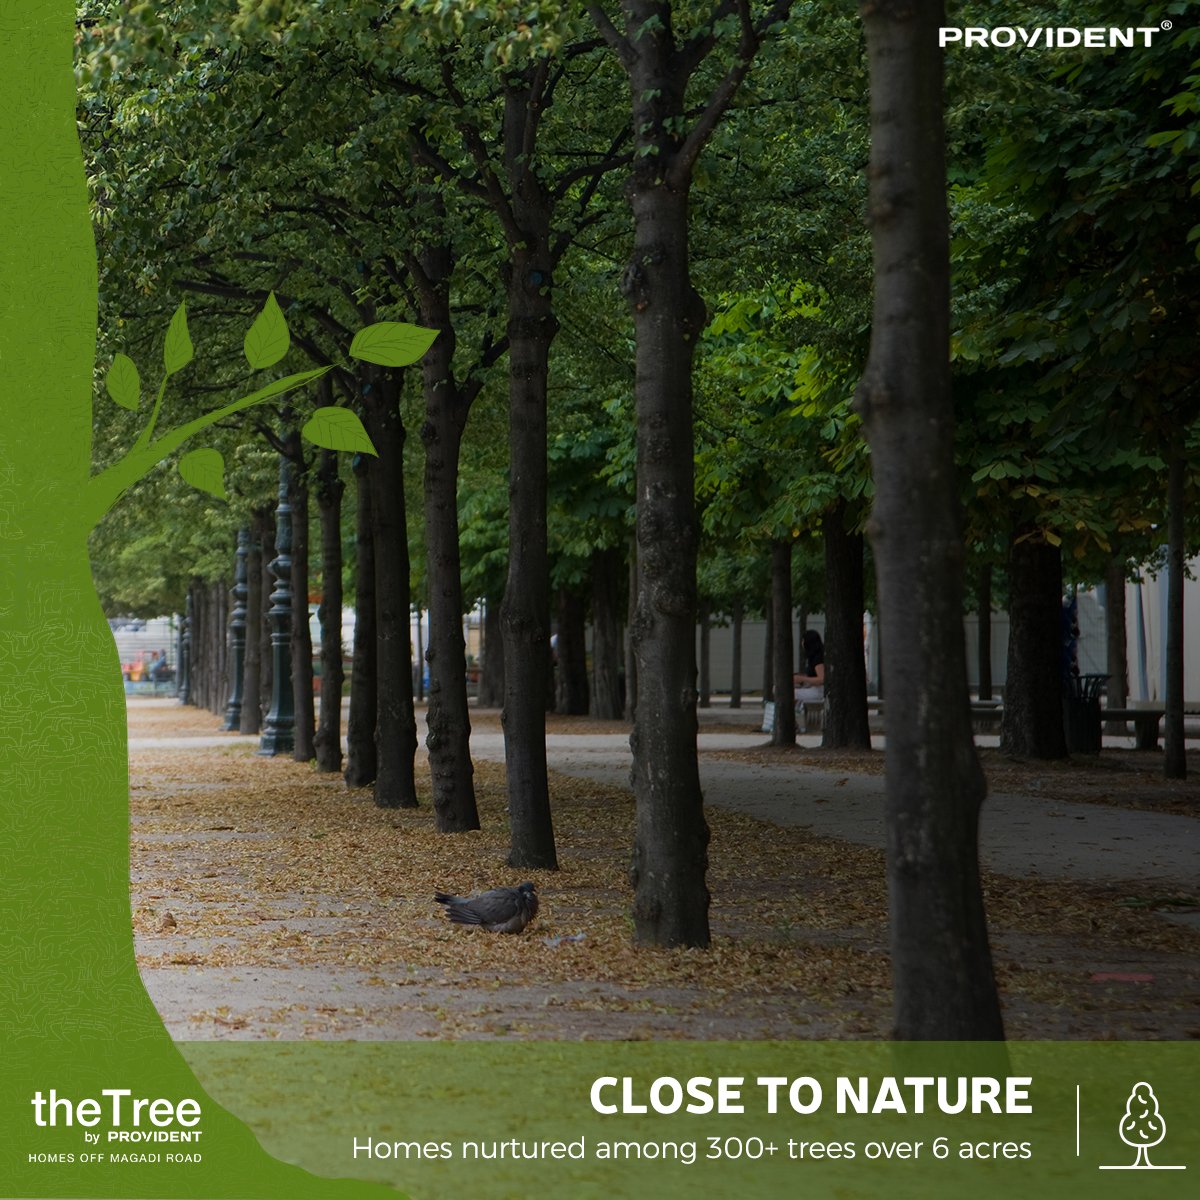 Homes nurtured amidst 300 plus trees spread over 6 acres at Provident The Tree Update